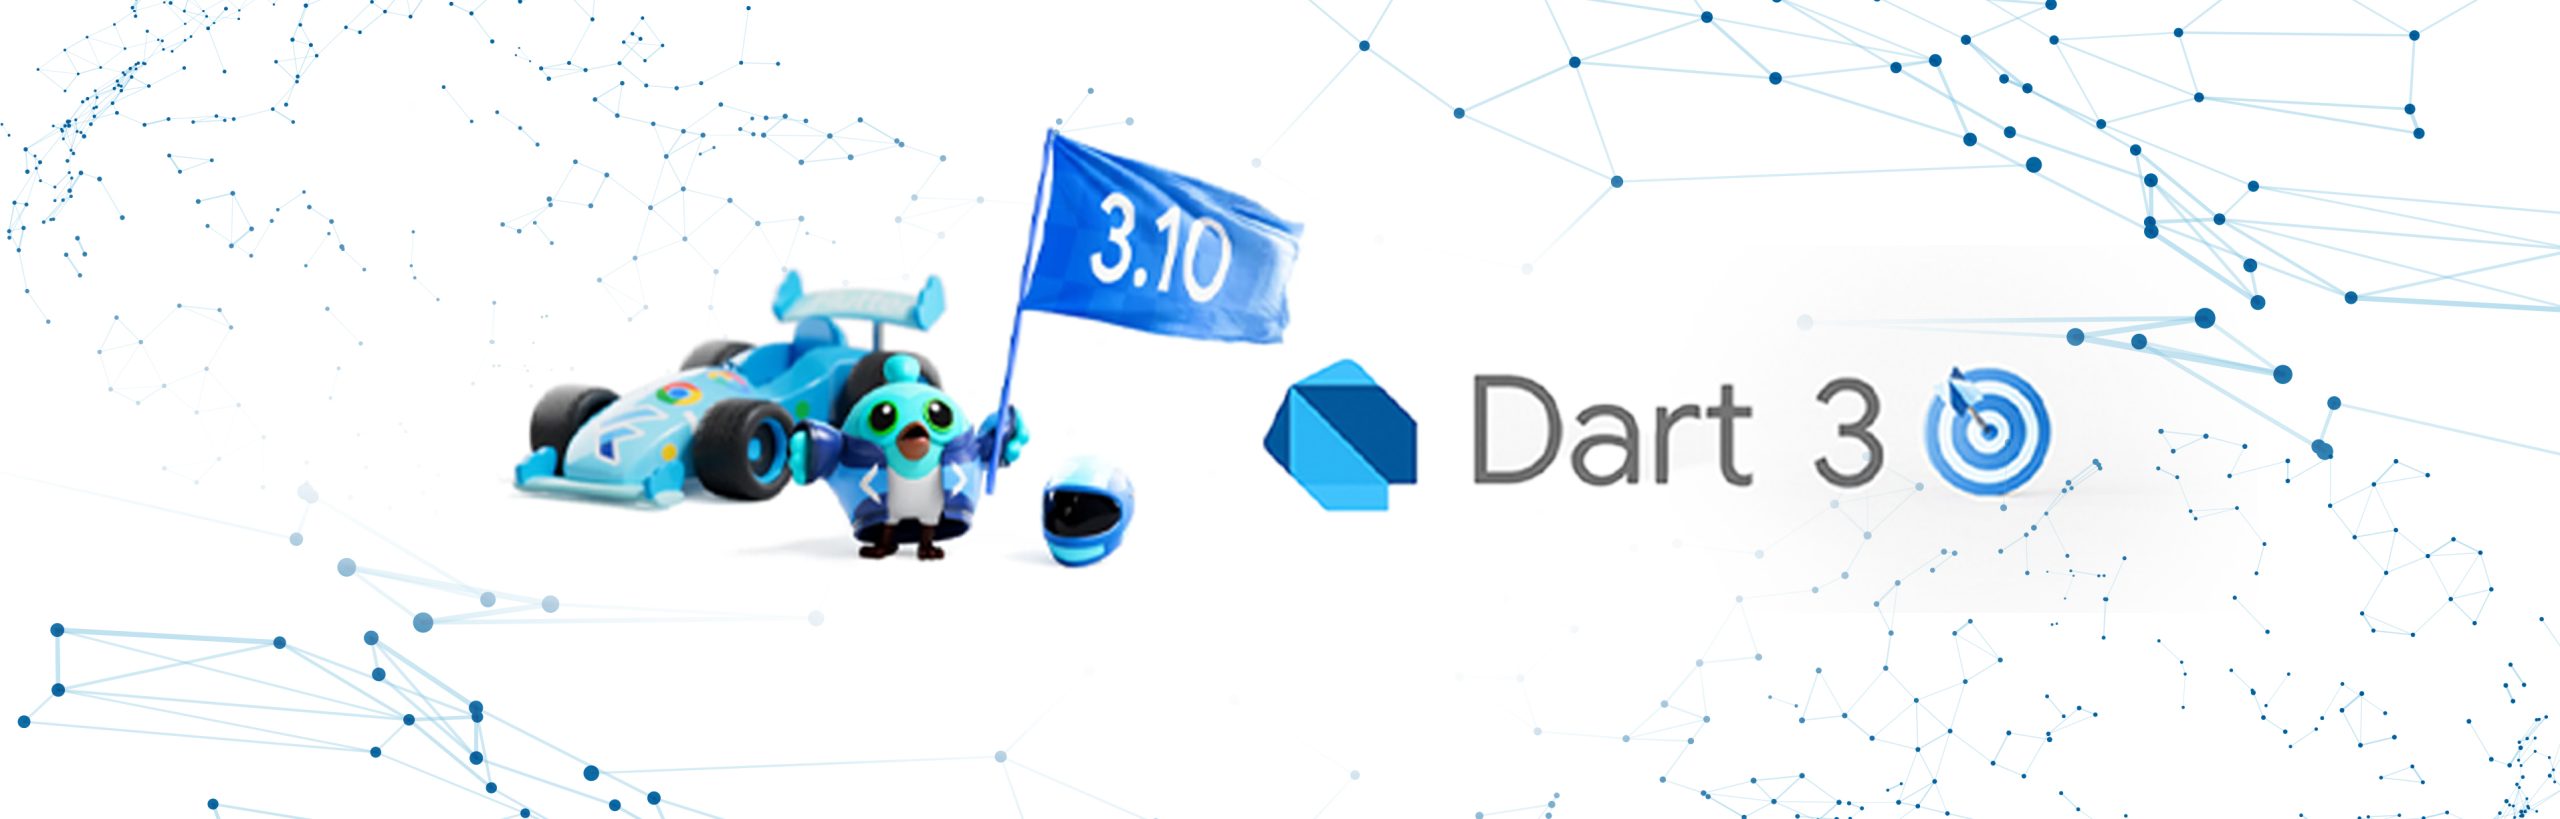 <strong>Google’s Flutter 3.10 and Dart 3: A Dive into the Latest Update</strong>